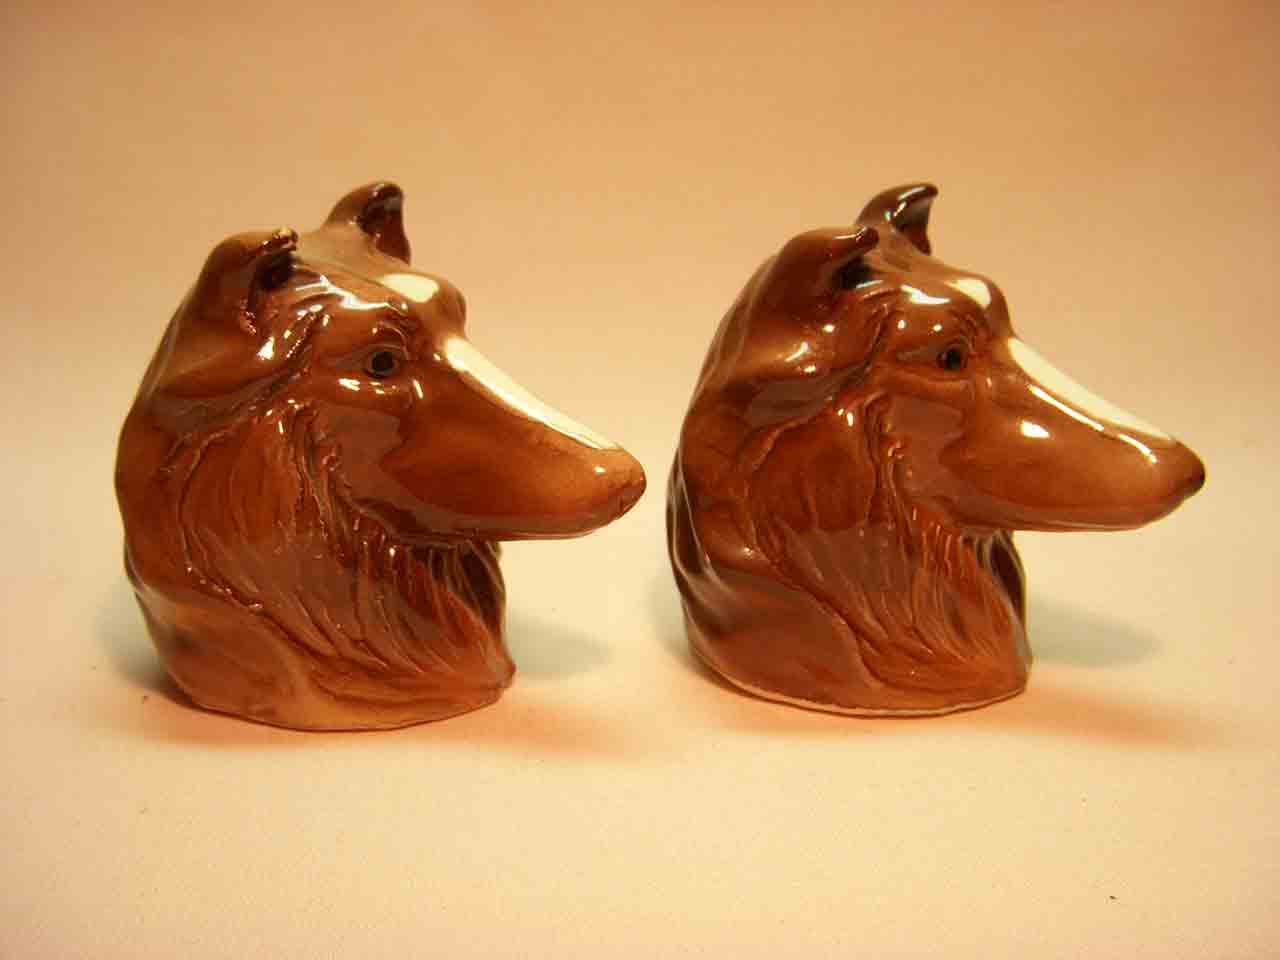 Japan realistic dog heads series of salt and pepper shakers - Collies